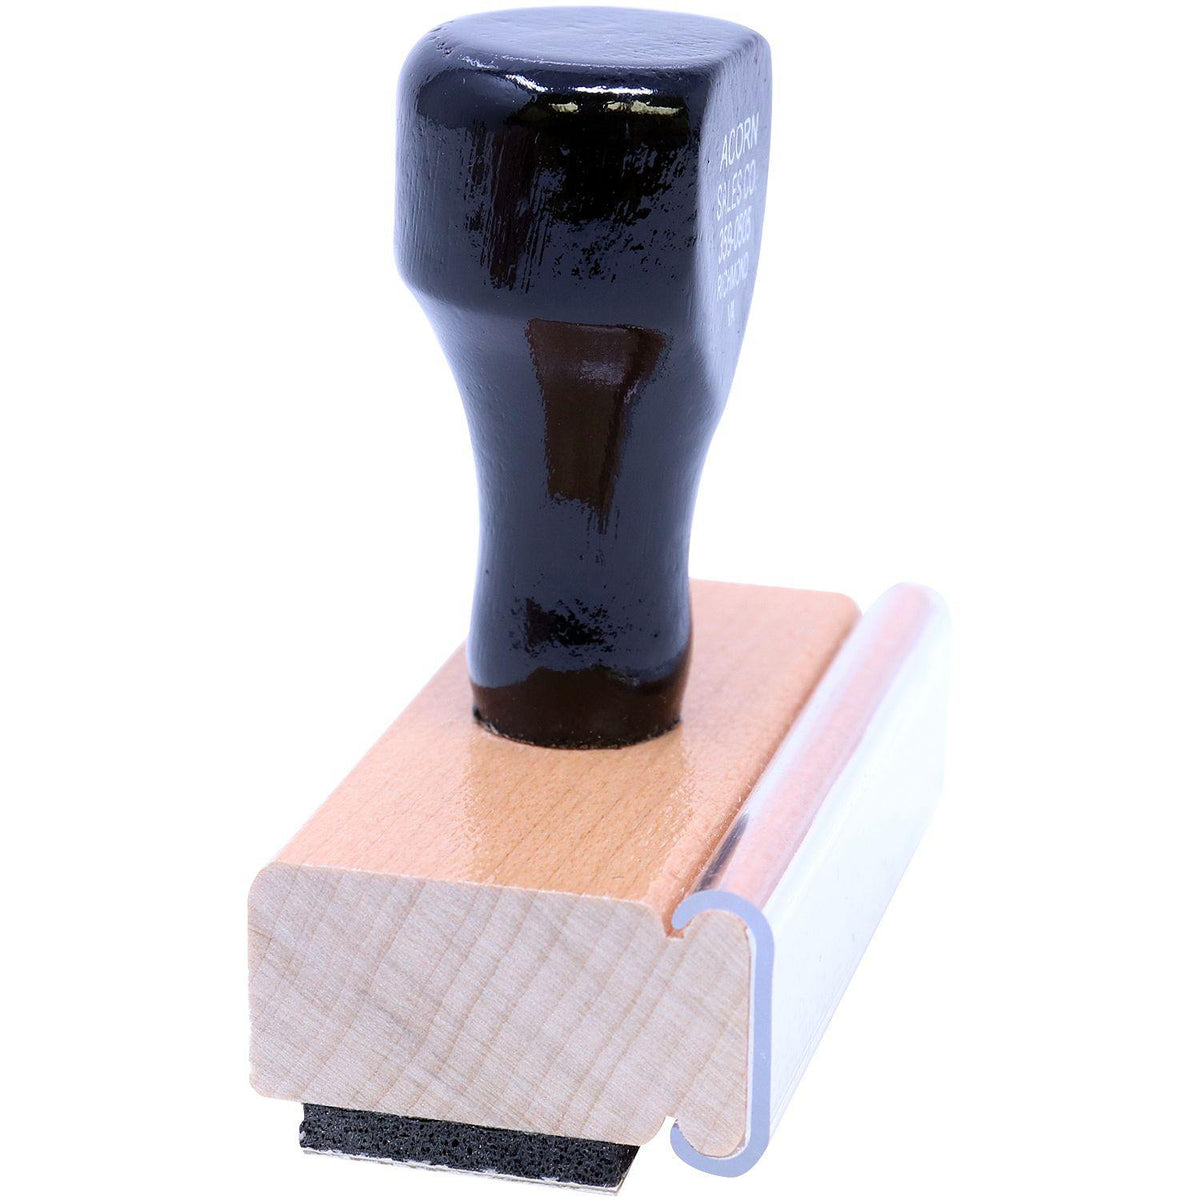 Refinance Rubber Stamp - Engineer Seal Stamps - Brand_Acorn, Impression Size_Small, Stamp Type_Regular Stamp, Type of Use_Finance